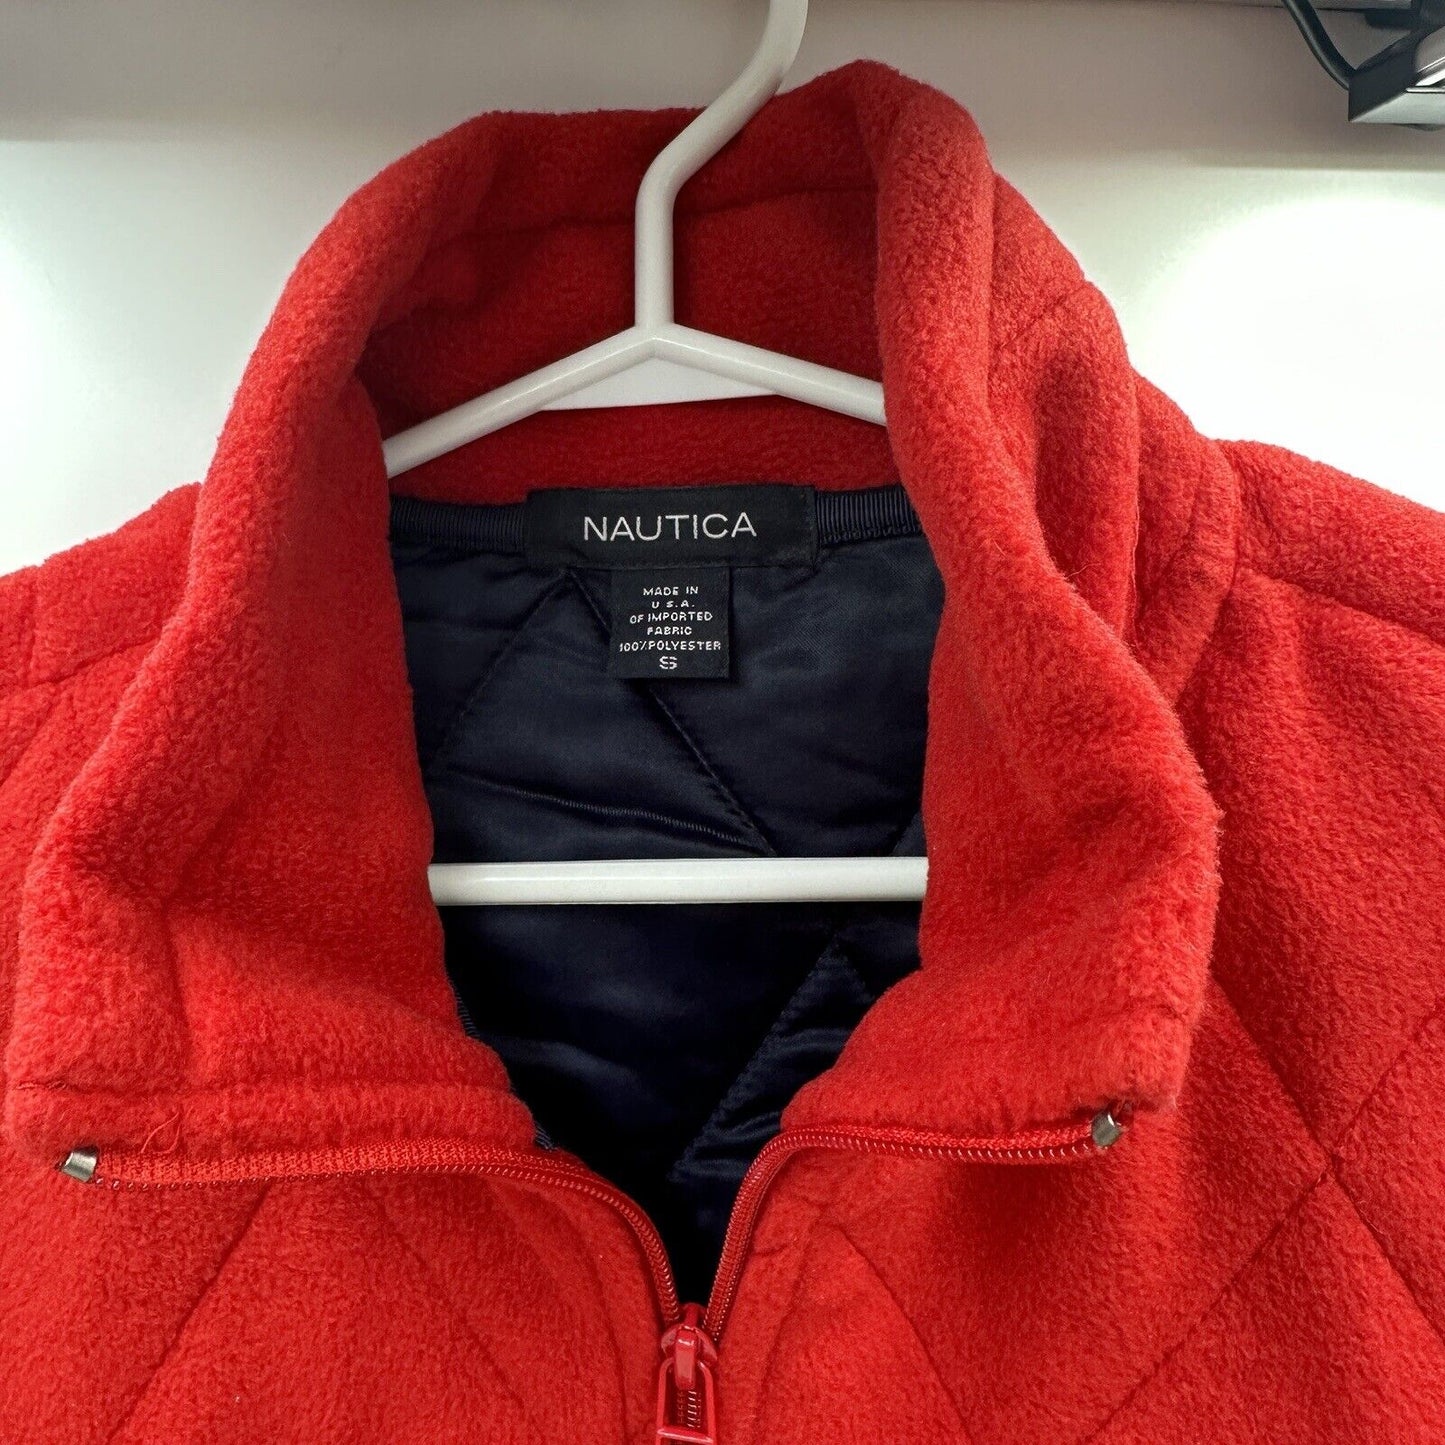 Nautica Nautech Women's Size S Vest Made in USA Regular Fit Fleece Red Quilted